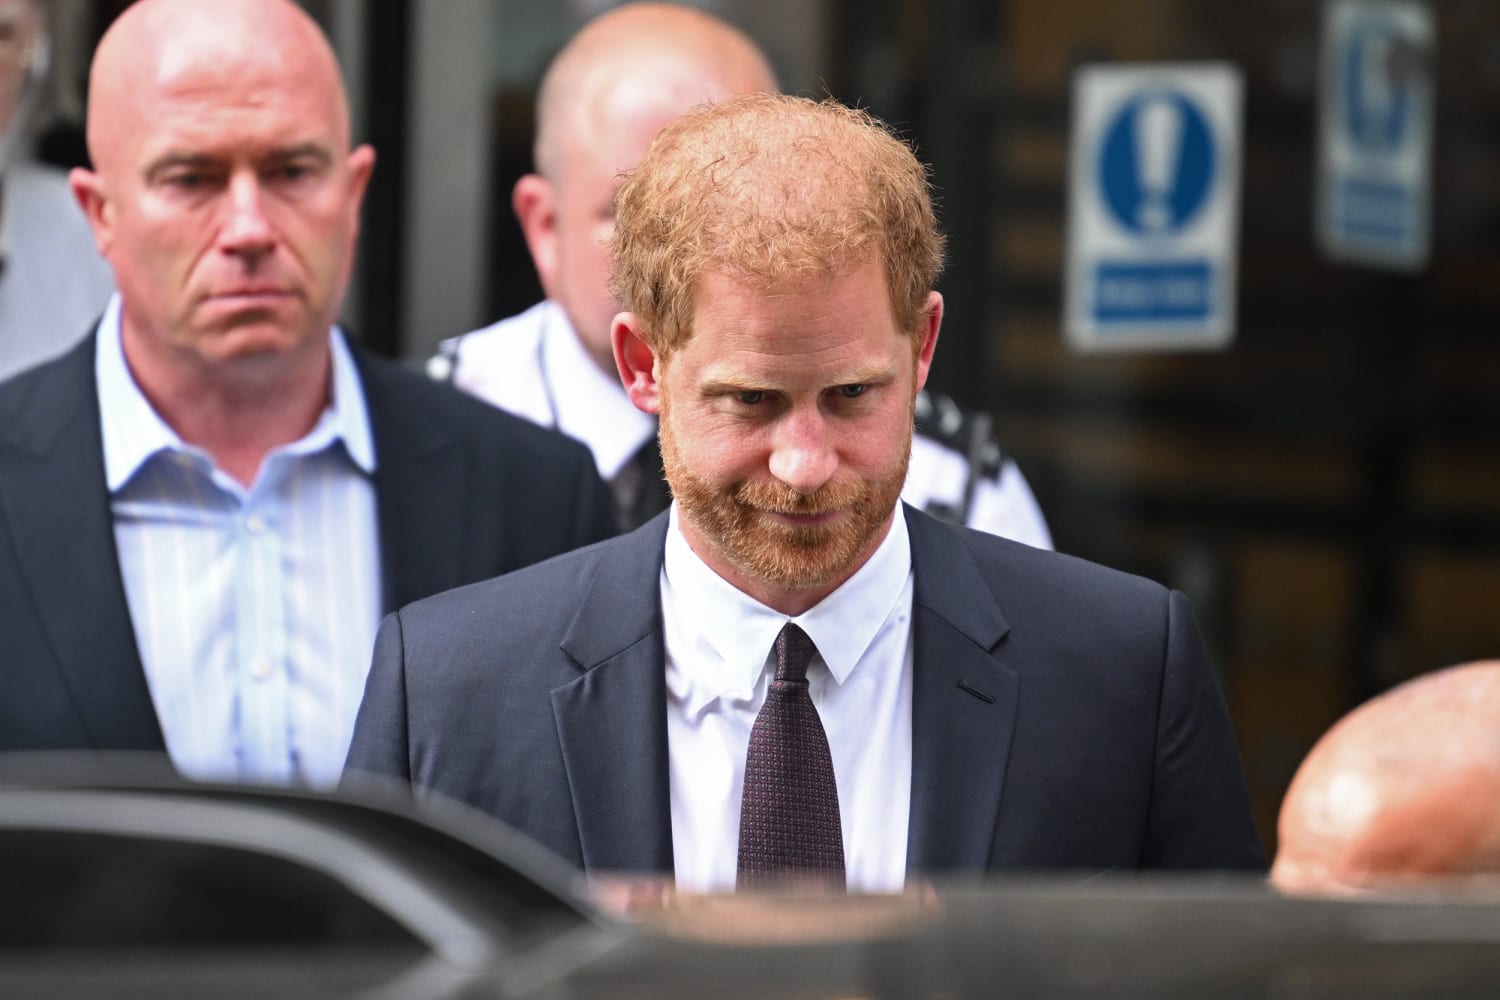 Prince Harry says tabloids have ‘blood on their hands’ in historic testimony